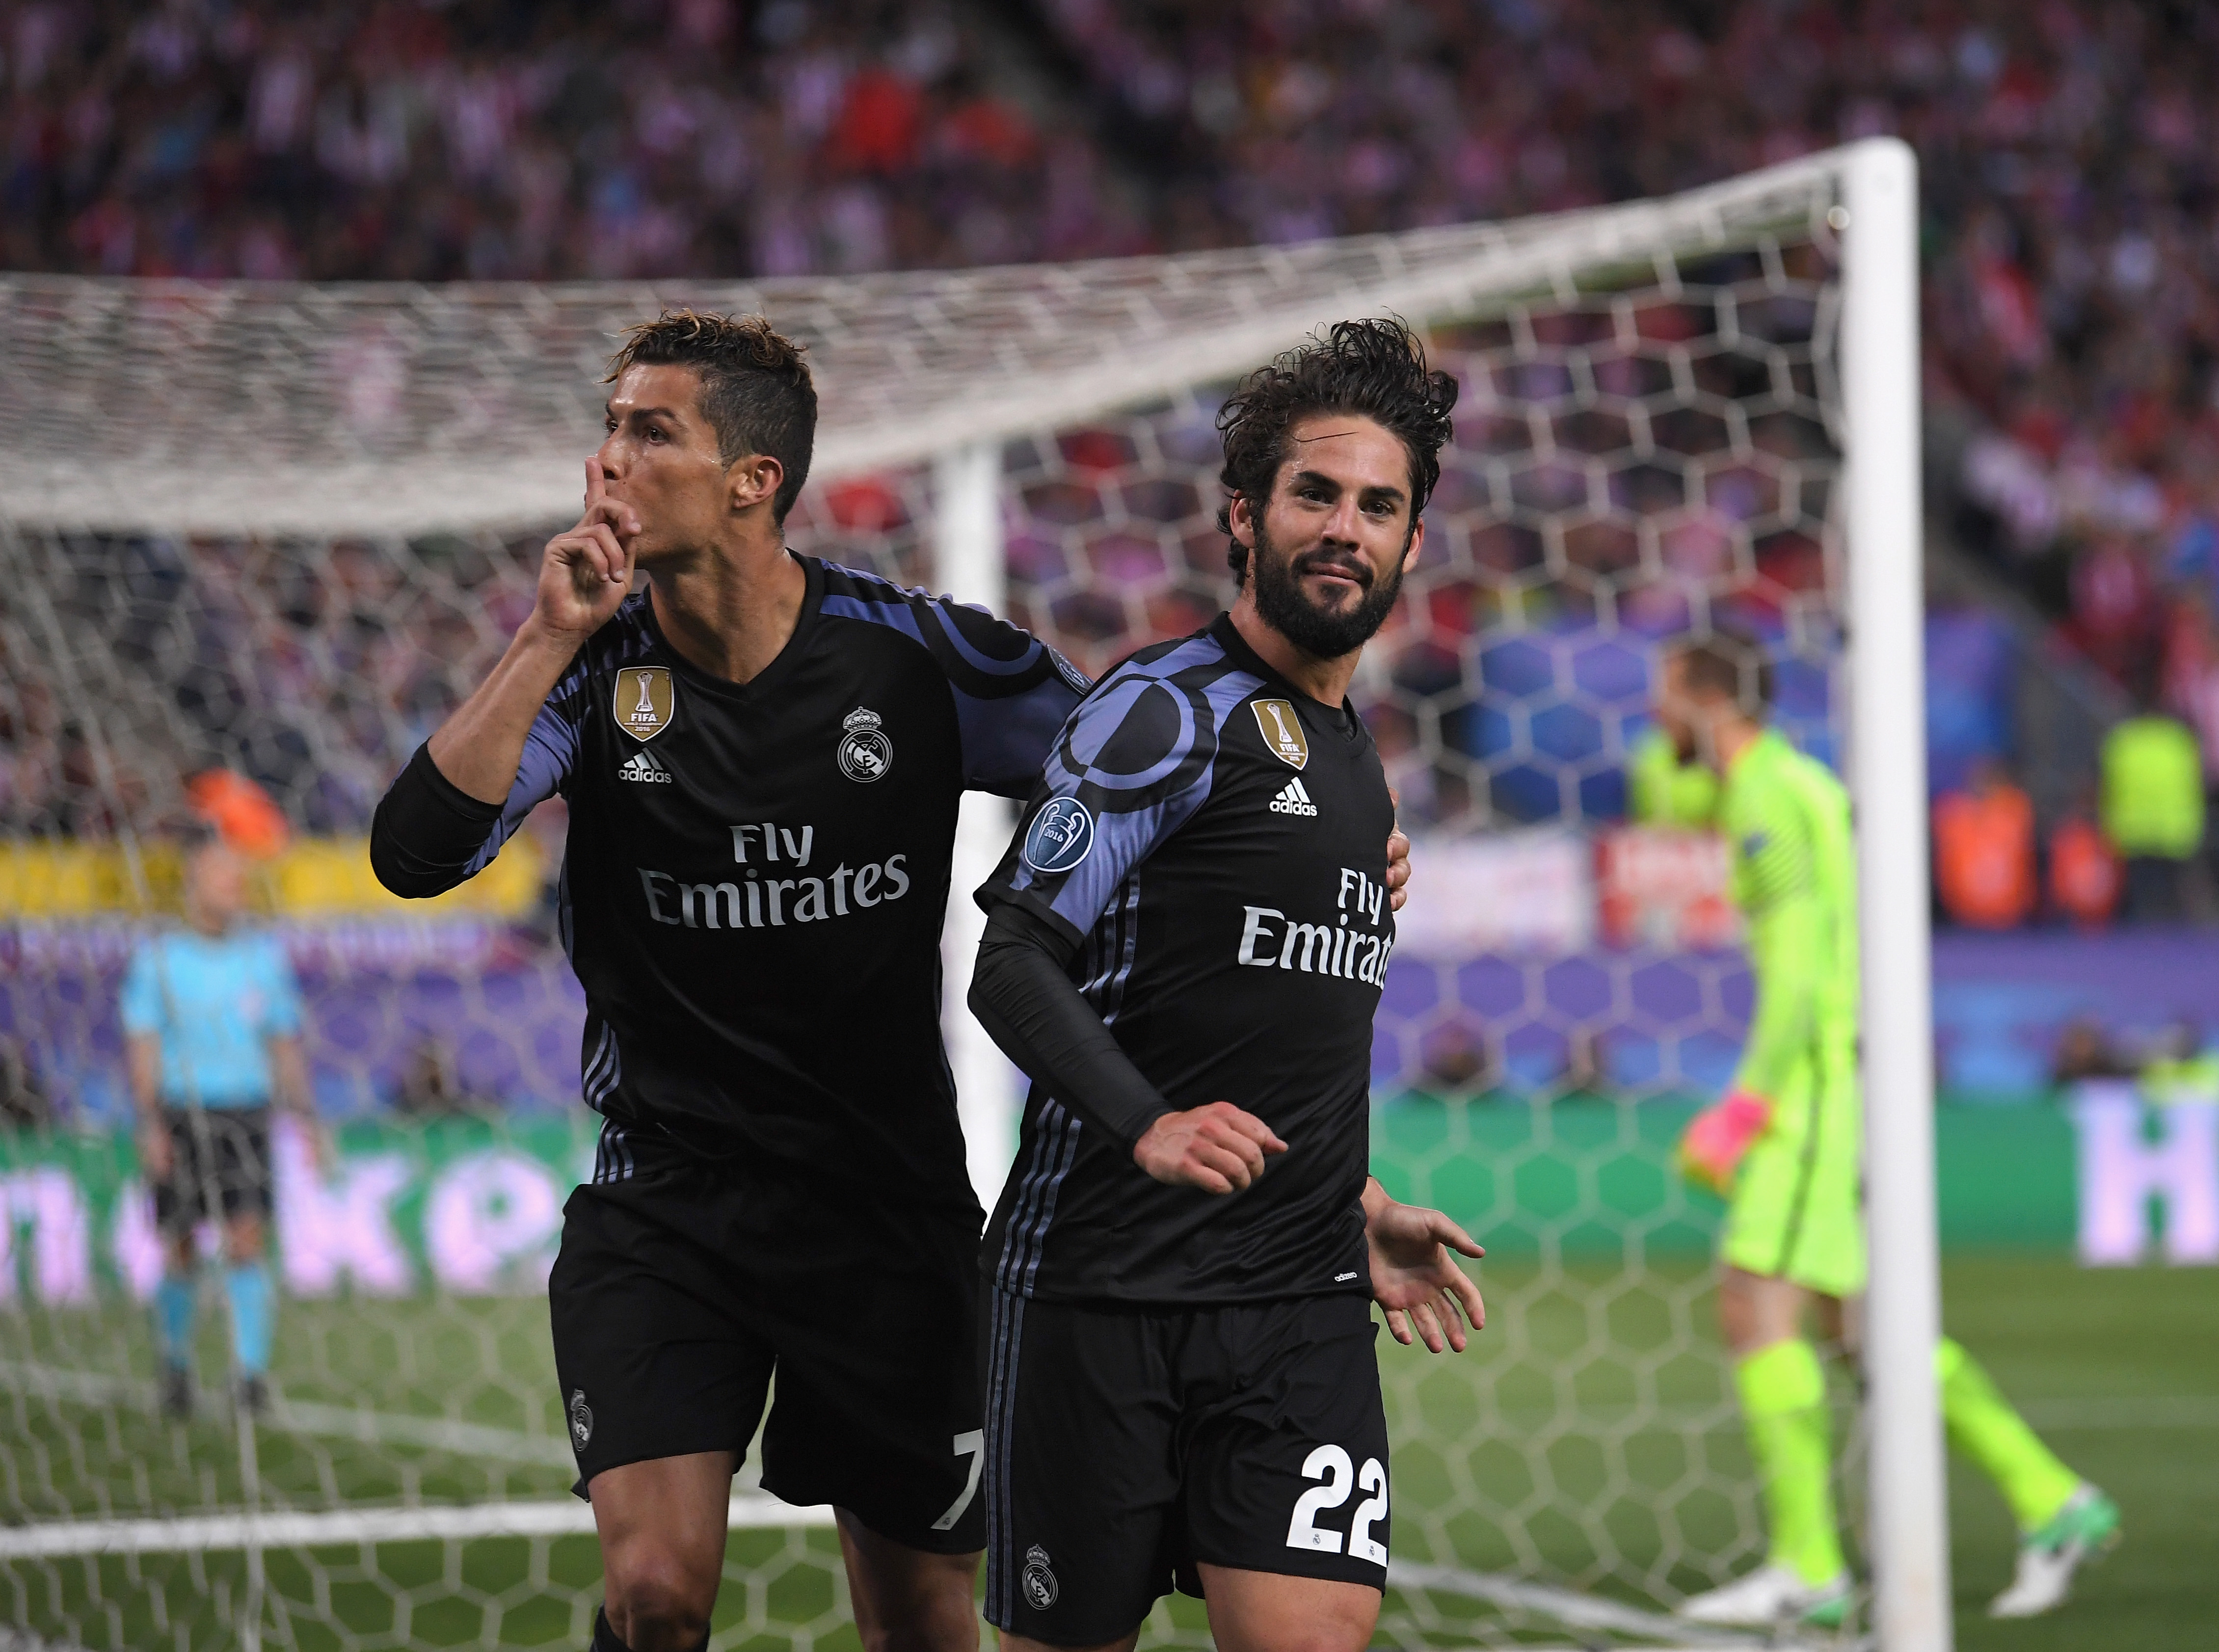 MADRID, SPAIN - MAY 10:  Isco (R) of Real Madrid celebrates scoring his team's opening goal with Cristiano Ronaldo during the UEFA Champions League Semi Final second leg match between Club Atletico de Madrid and Real Madrid CF at Vicente Calderon Stadium on May 10, 2017 in Madrid, Spain.  (Photo by Laurence Griffiths/Getty Images)